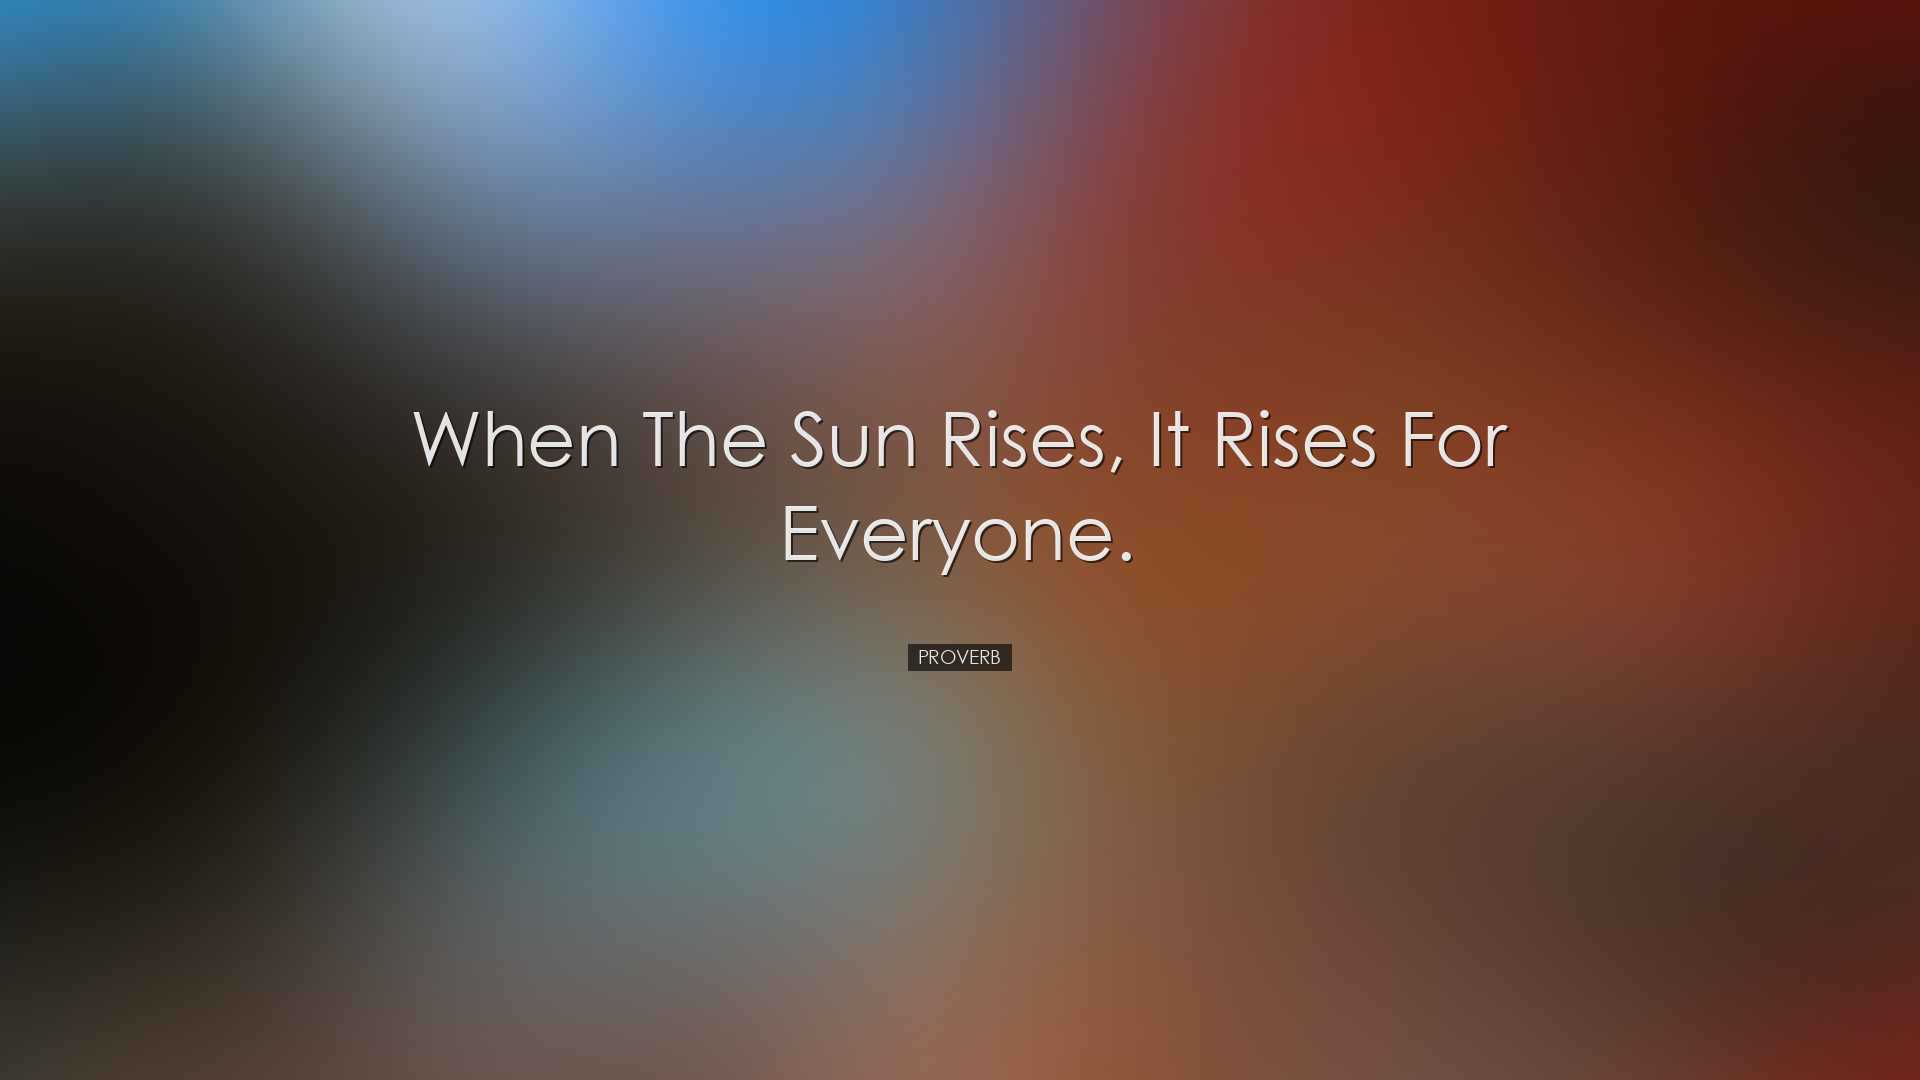 When the sun rises, it rises for everyone. - Proverb